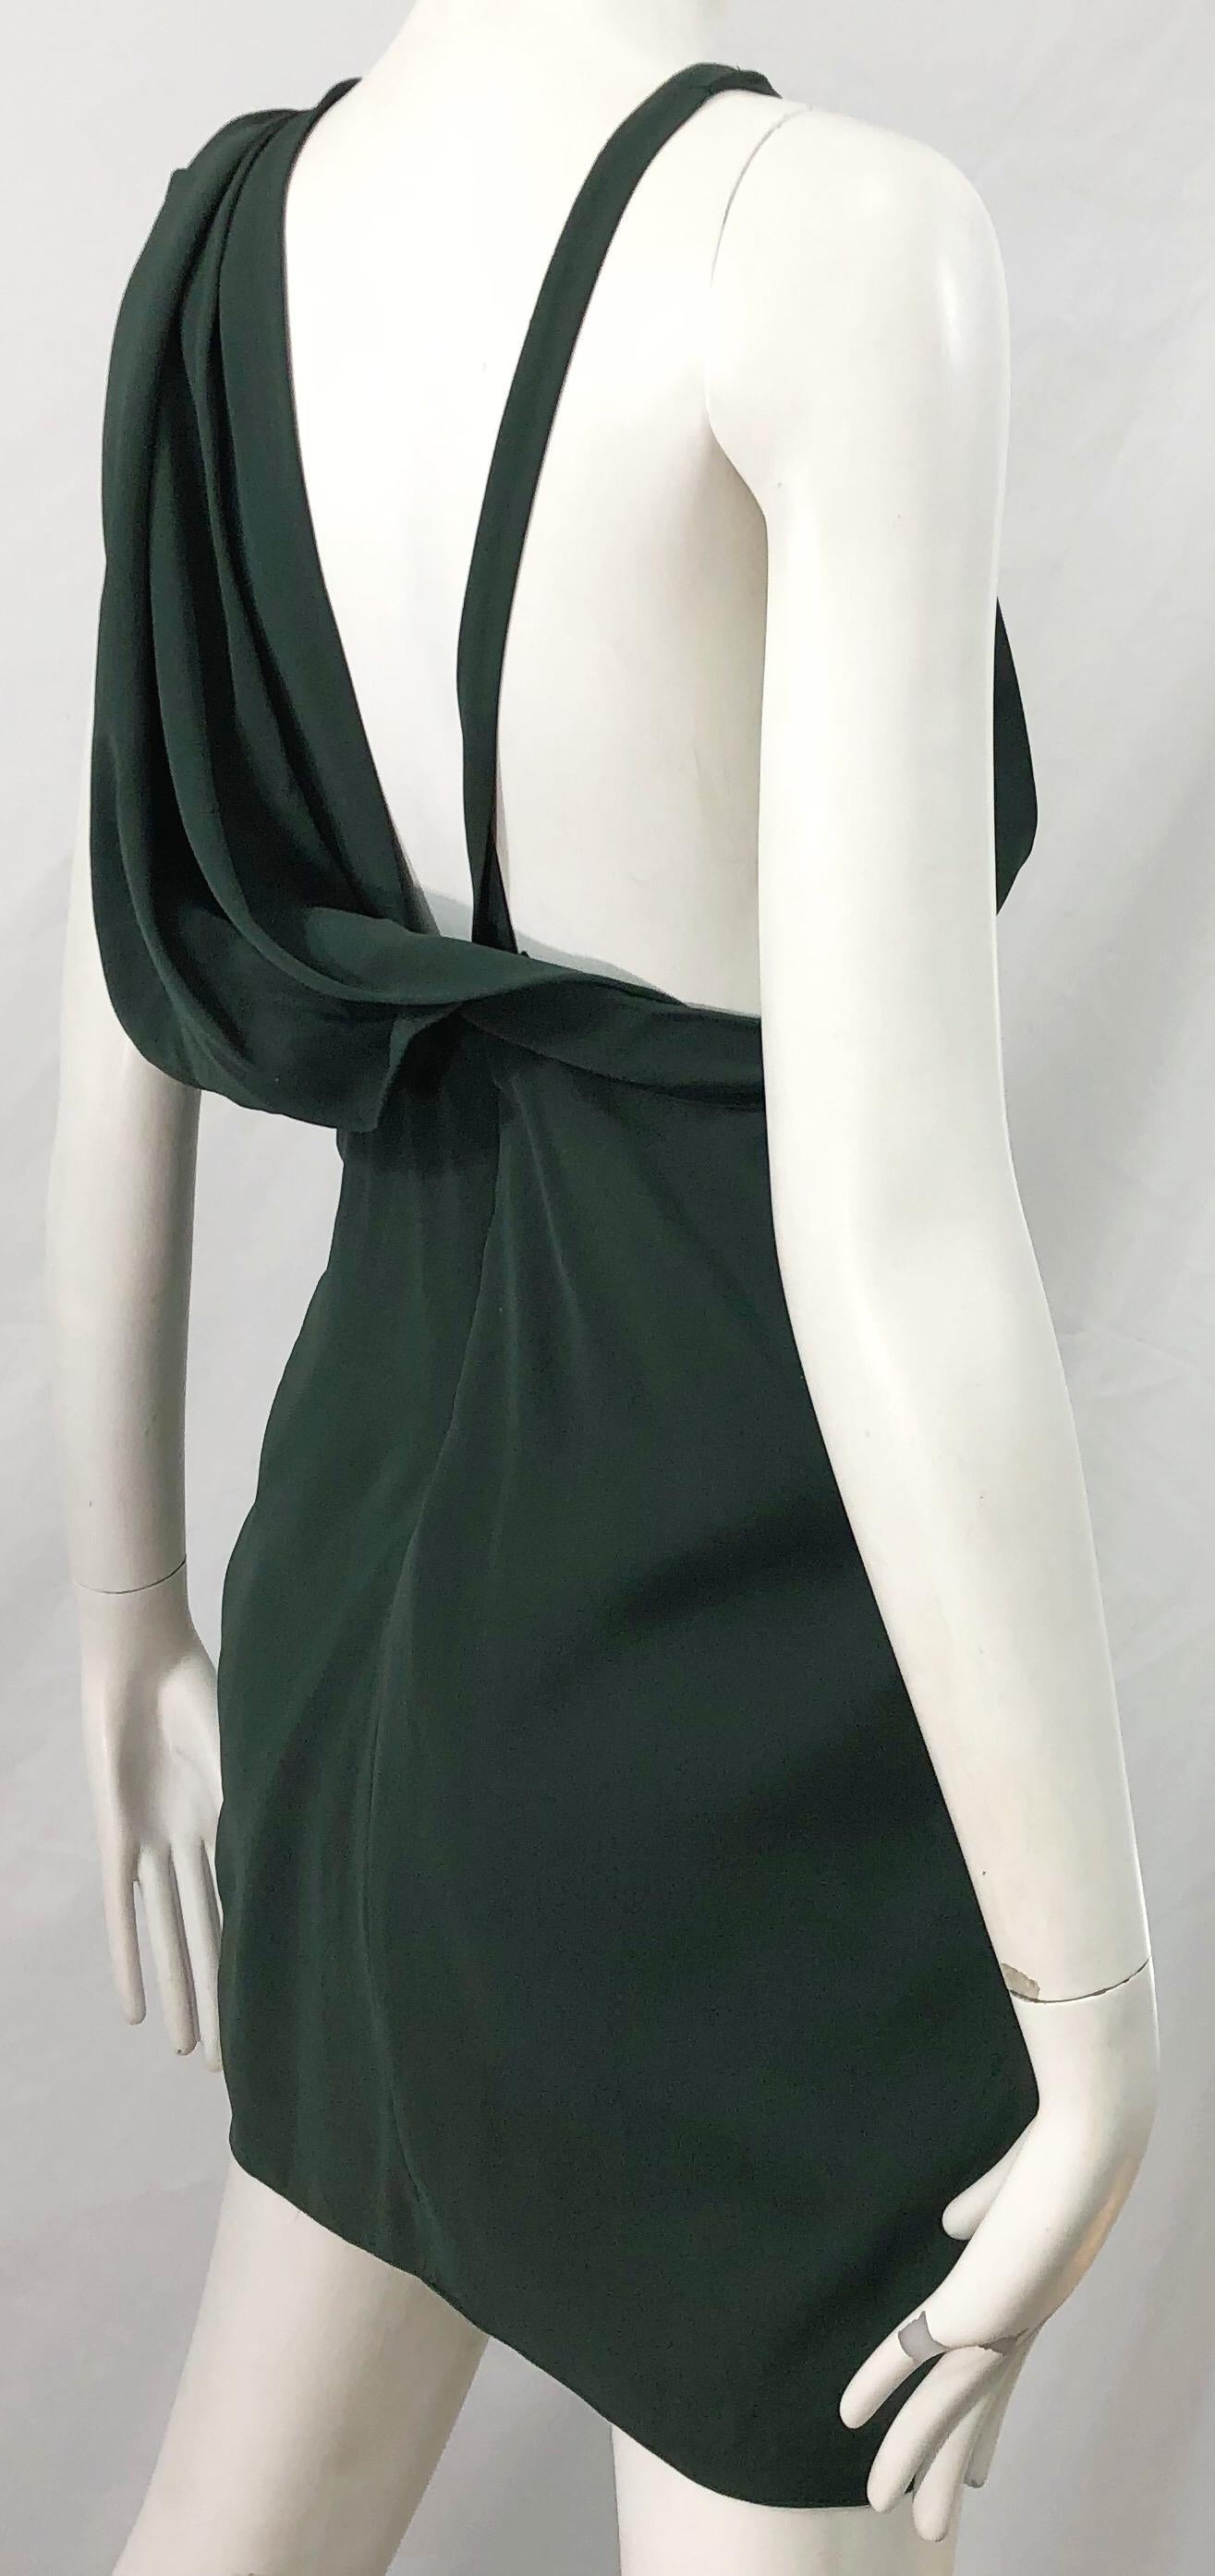 Black J Mendel Hunter Forest Green Sexy Plunging Early 2000s Asymmetrical Mini Dress For Sale